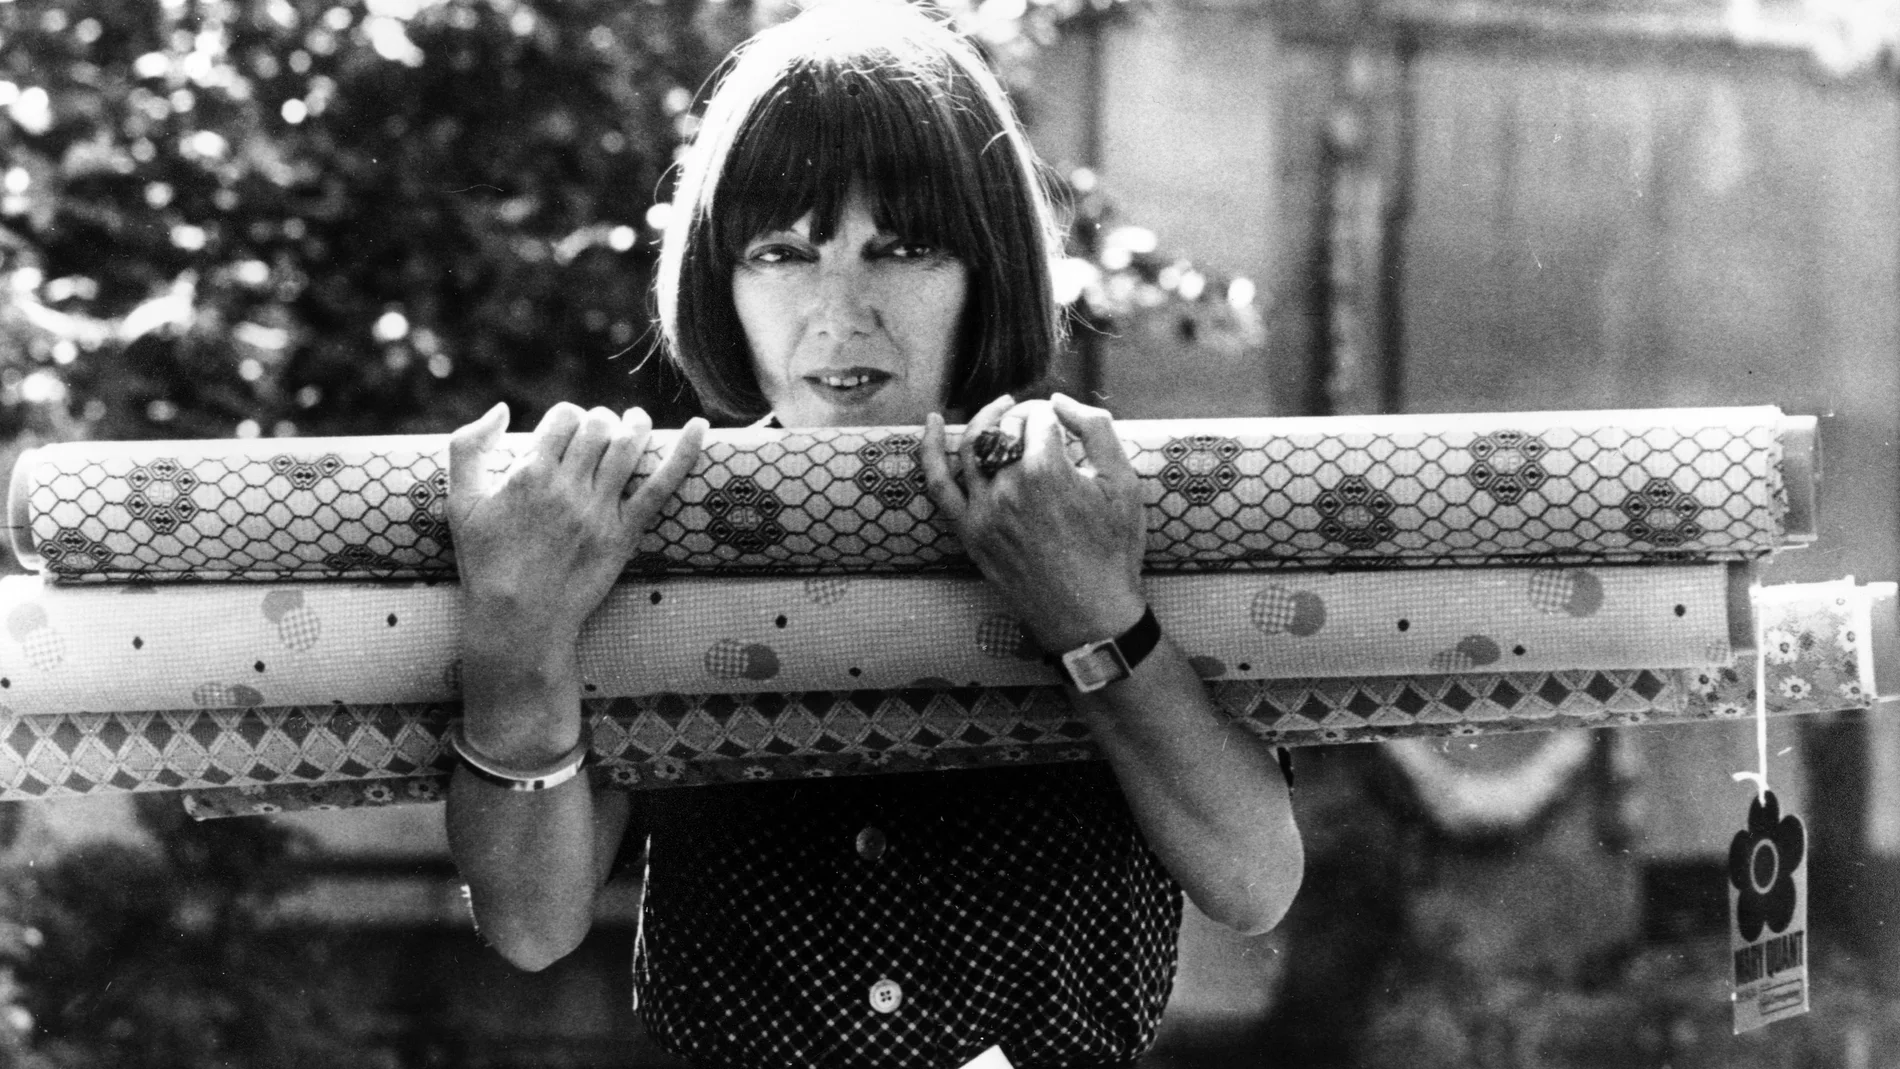 FILE - British fashion designer Mary Quant carries rolls of fabric in her arms, which were used for her new designs shown at the Savoy Hotel earlier, in London, England on Sept. 18, 1974. Quant, the designer whose fashions epitomized the Swinging 60s, has died at the age of 93. Quant's family said she died “peacefully at home” in Surrey, southern England, on Thursday, April 13, 2023. (AP Photo/D. Royle, File)